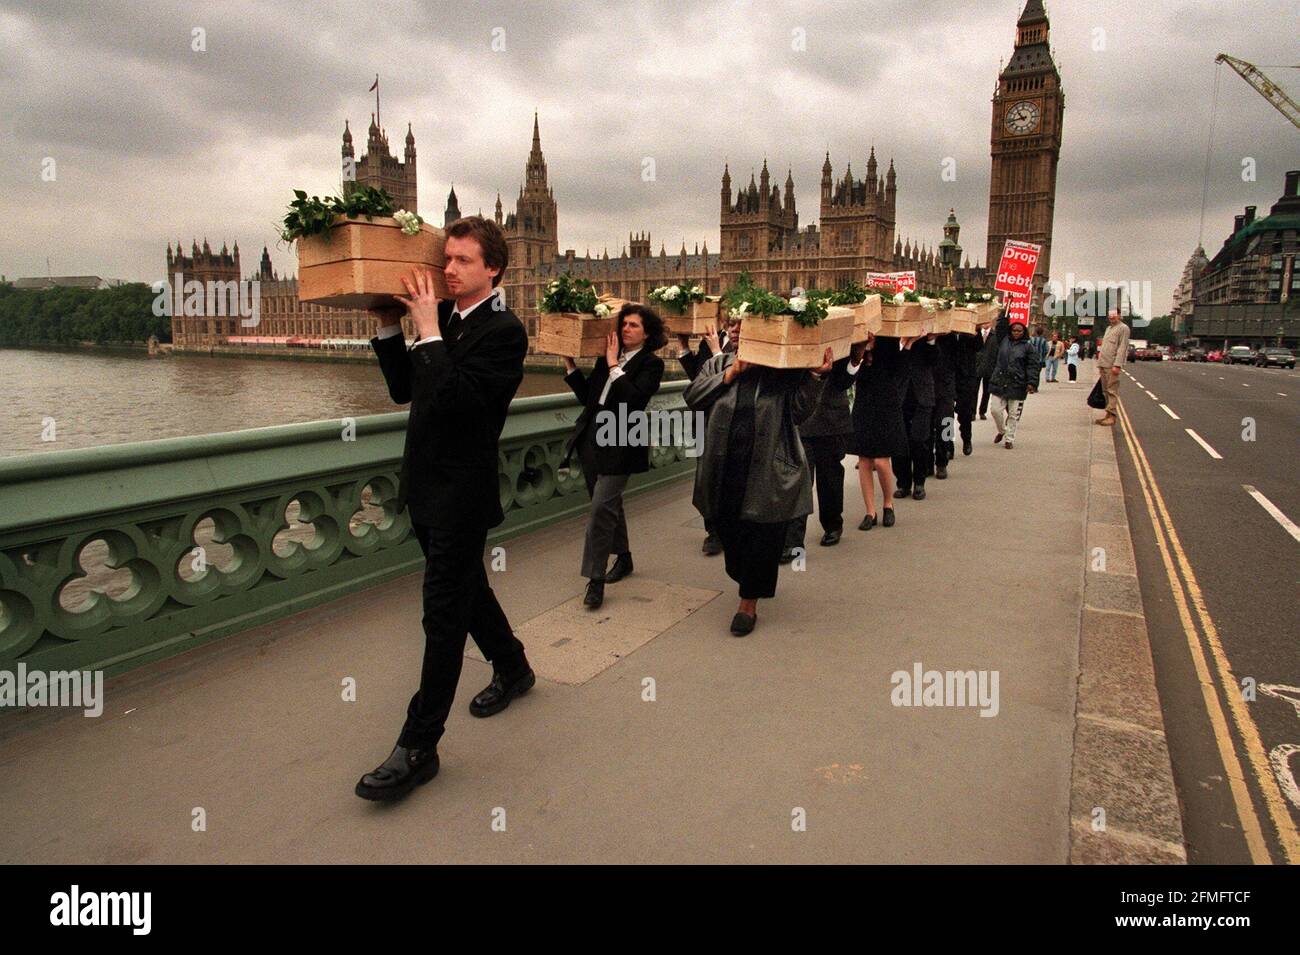 MOCK FUNERAL by CHRISTIAN AID June 1999A MOCK FUNERAL  WITH 13 SMALL COFFINS TO SYMBOLISE THAT 13 CHILDREN DIE EVERY MINUTE IN AFRICA BECAUSE OF DEBT  IS STAGED BY CHRISTIAN AID  ACROSS WESTMINSTER BRIDGE Stock Photo